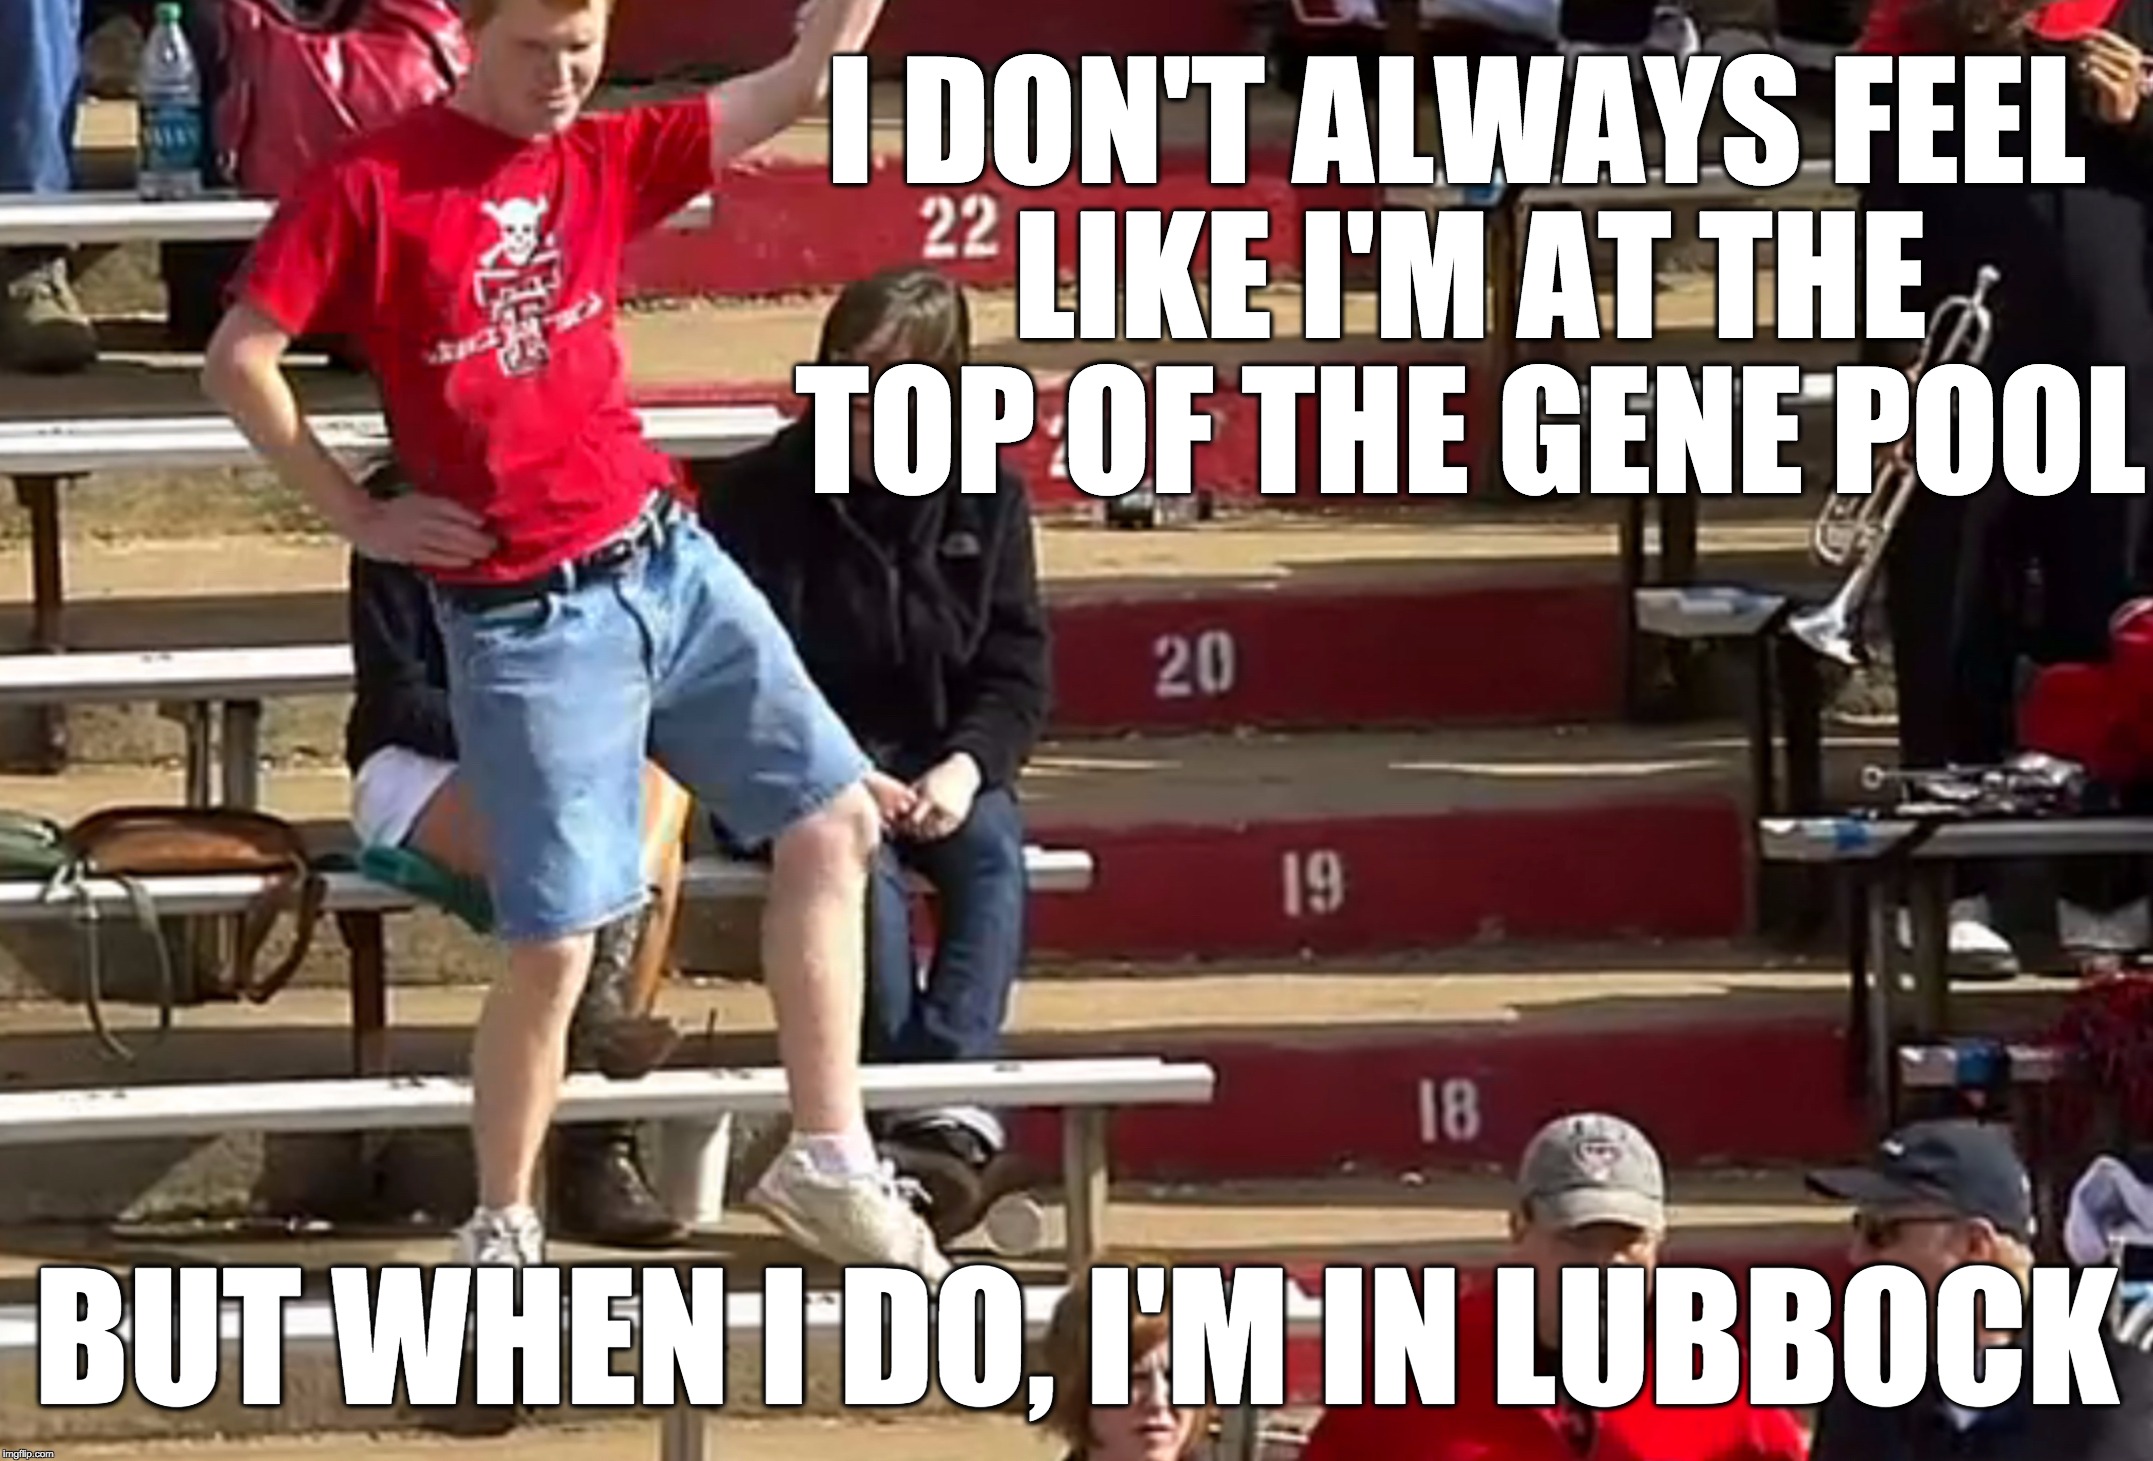 When you get to Lubbock... | I DON'T ALWAYS FEEL LIKE I'M AT THE TOP OF THE GENE POOL BUT WHEN I DO, I'M IN LUBBOCK | image tagged in texas tech fans,tech,texas,funny memes,iq,lol | made w/ Imgflip meme maker